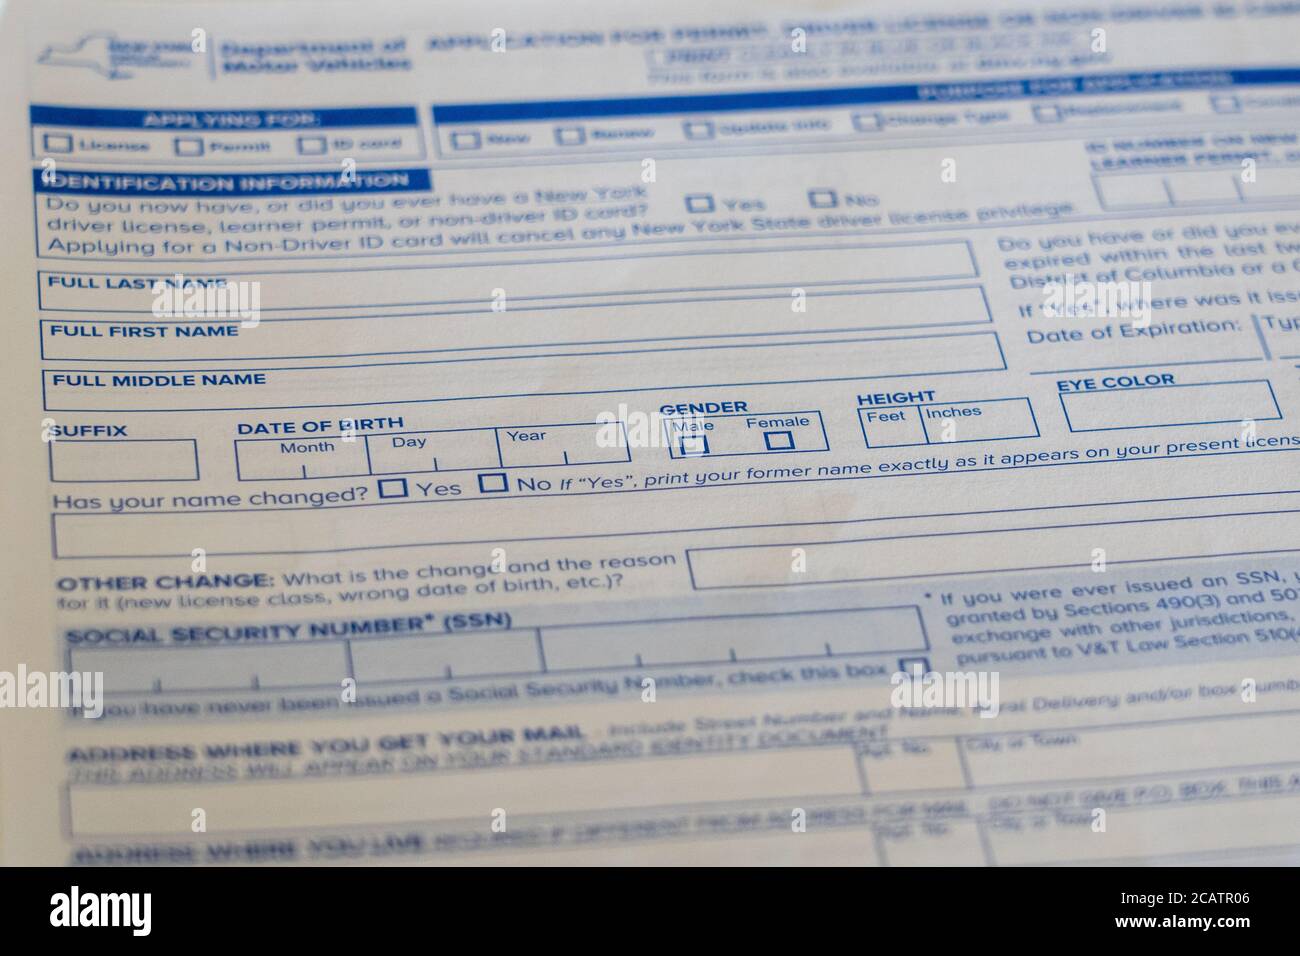 NEW YORK, NY - AUGUST 08: NY State Department of Motor Vehicles application (mv-44) for driver license on August 8, 2020 in New York City. Stock Photo